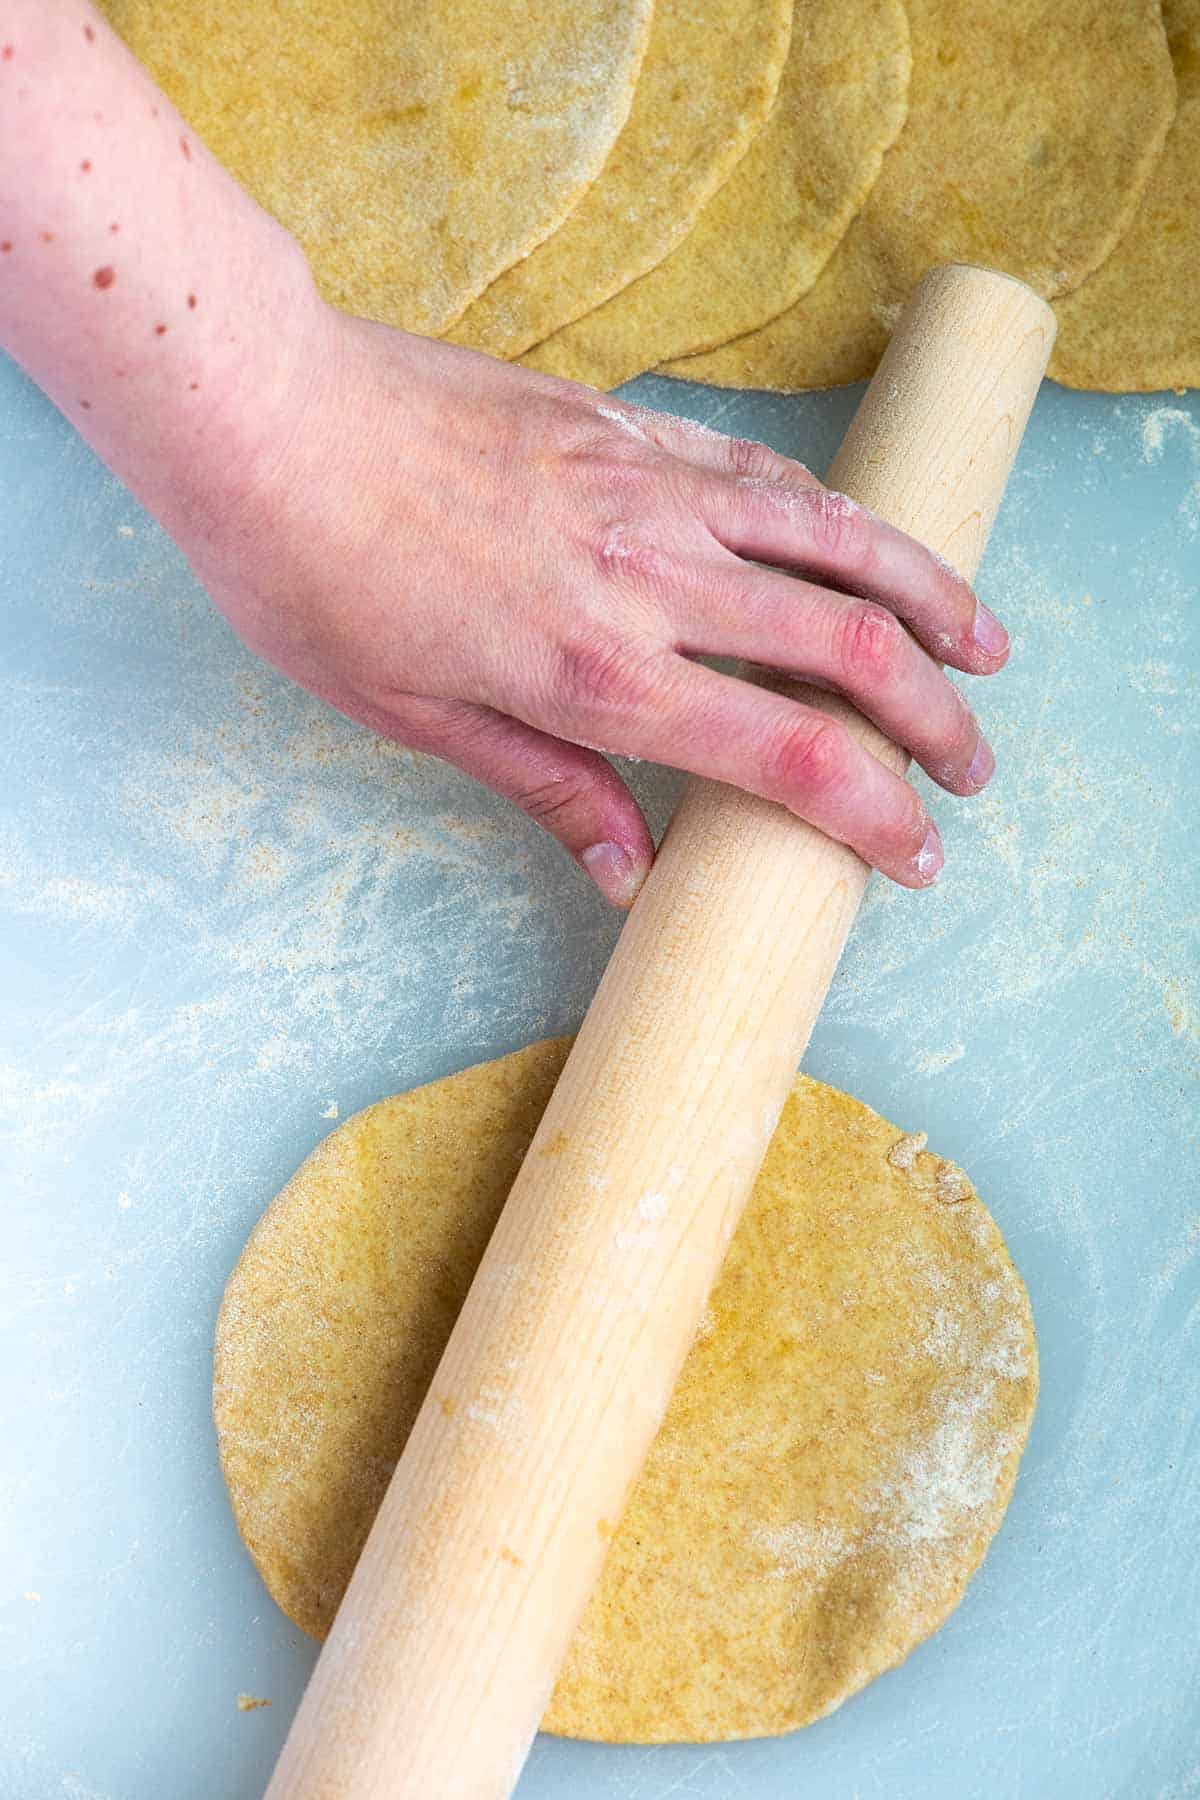 Rolling out the flatbread into thin discs